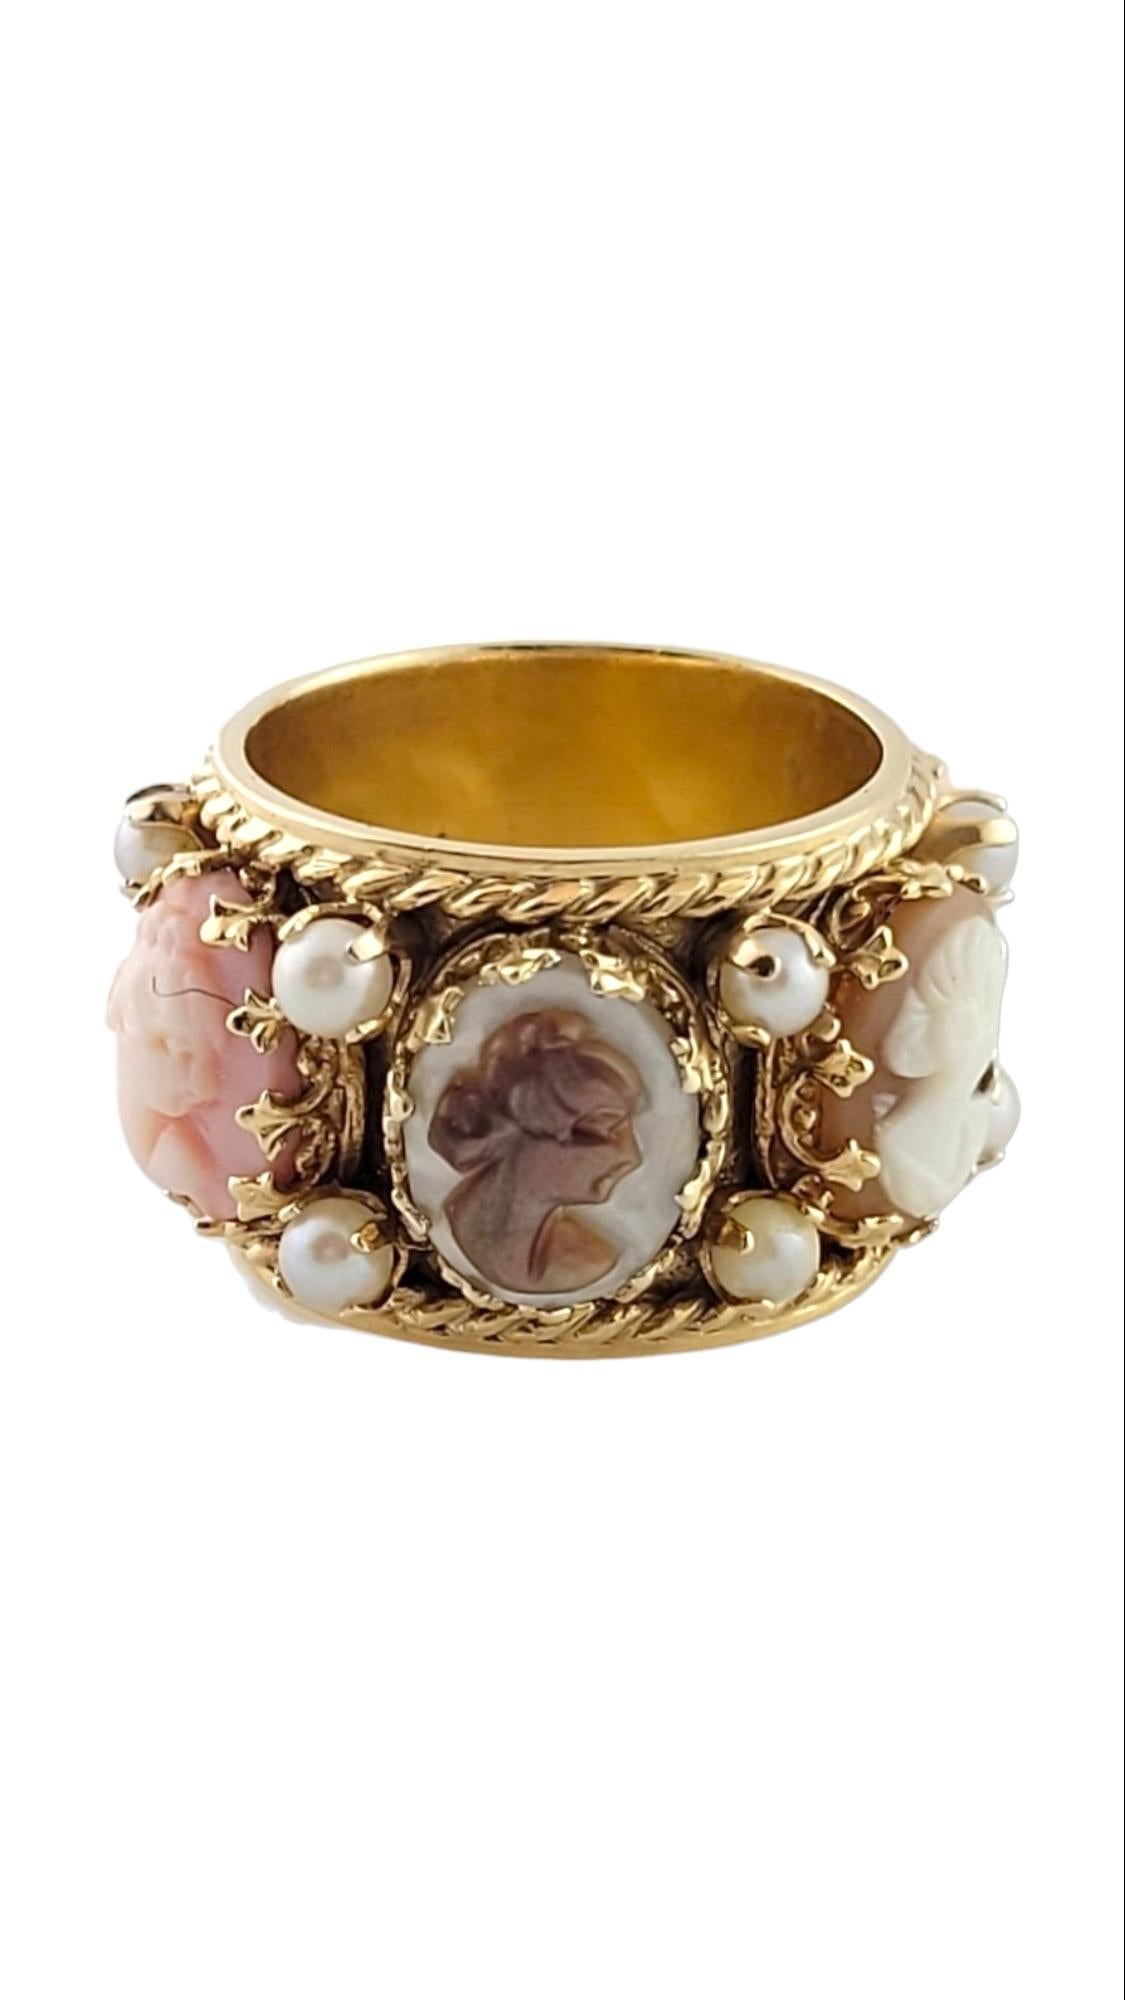 Vintage 14K Yellow Gold Cameo-Pearl Band Size 7.25

This gorgeous 14K gold cameo band is packed with beautiful detailing and 12 stunning white pearls!
Pearls: 3.1mm each

Ring size: 7.25
Shank: 15.0mm

Weight: 12.4 g/ 7.9 dwt

Hallmark: SB 14K

Very